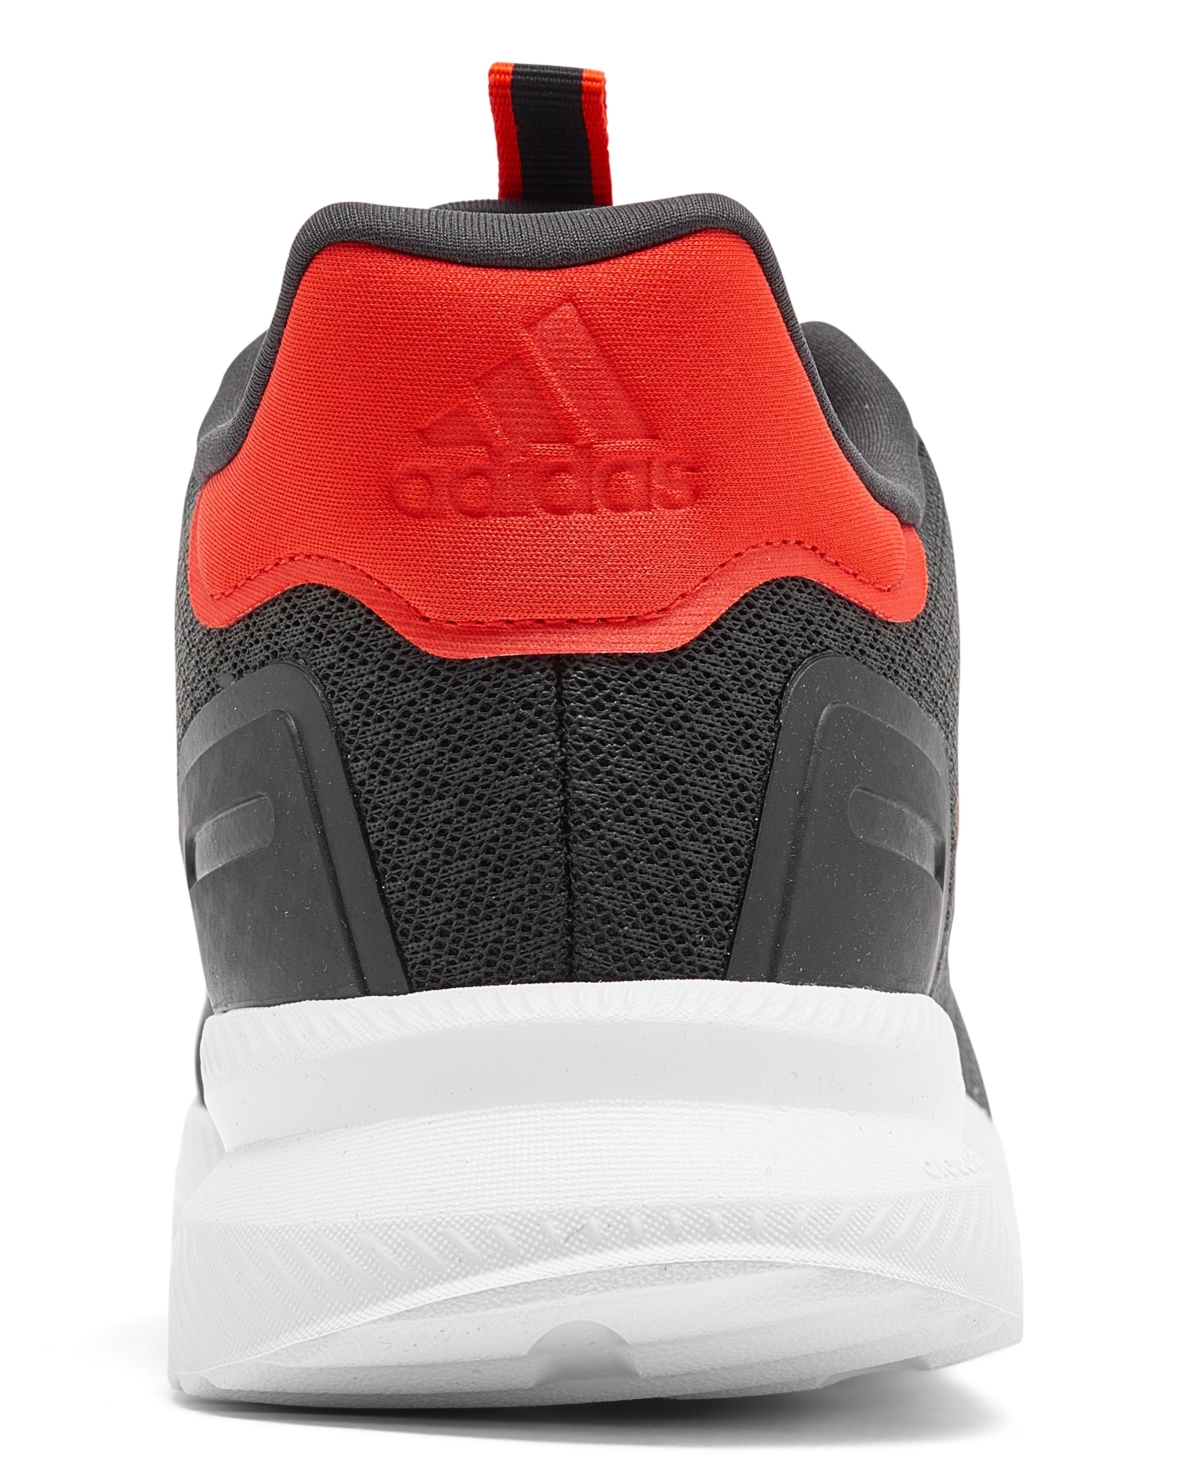 Shop Adidas Originals Originals Big Kids Xplr Casual Sneakers From Finish Line In Carbon,bright Red,cloud White